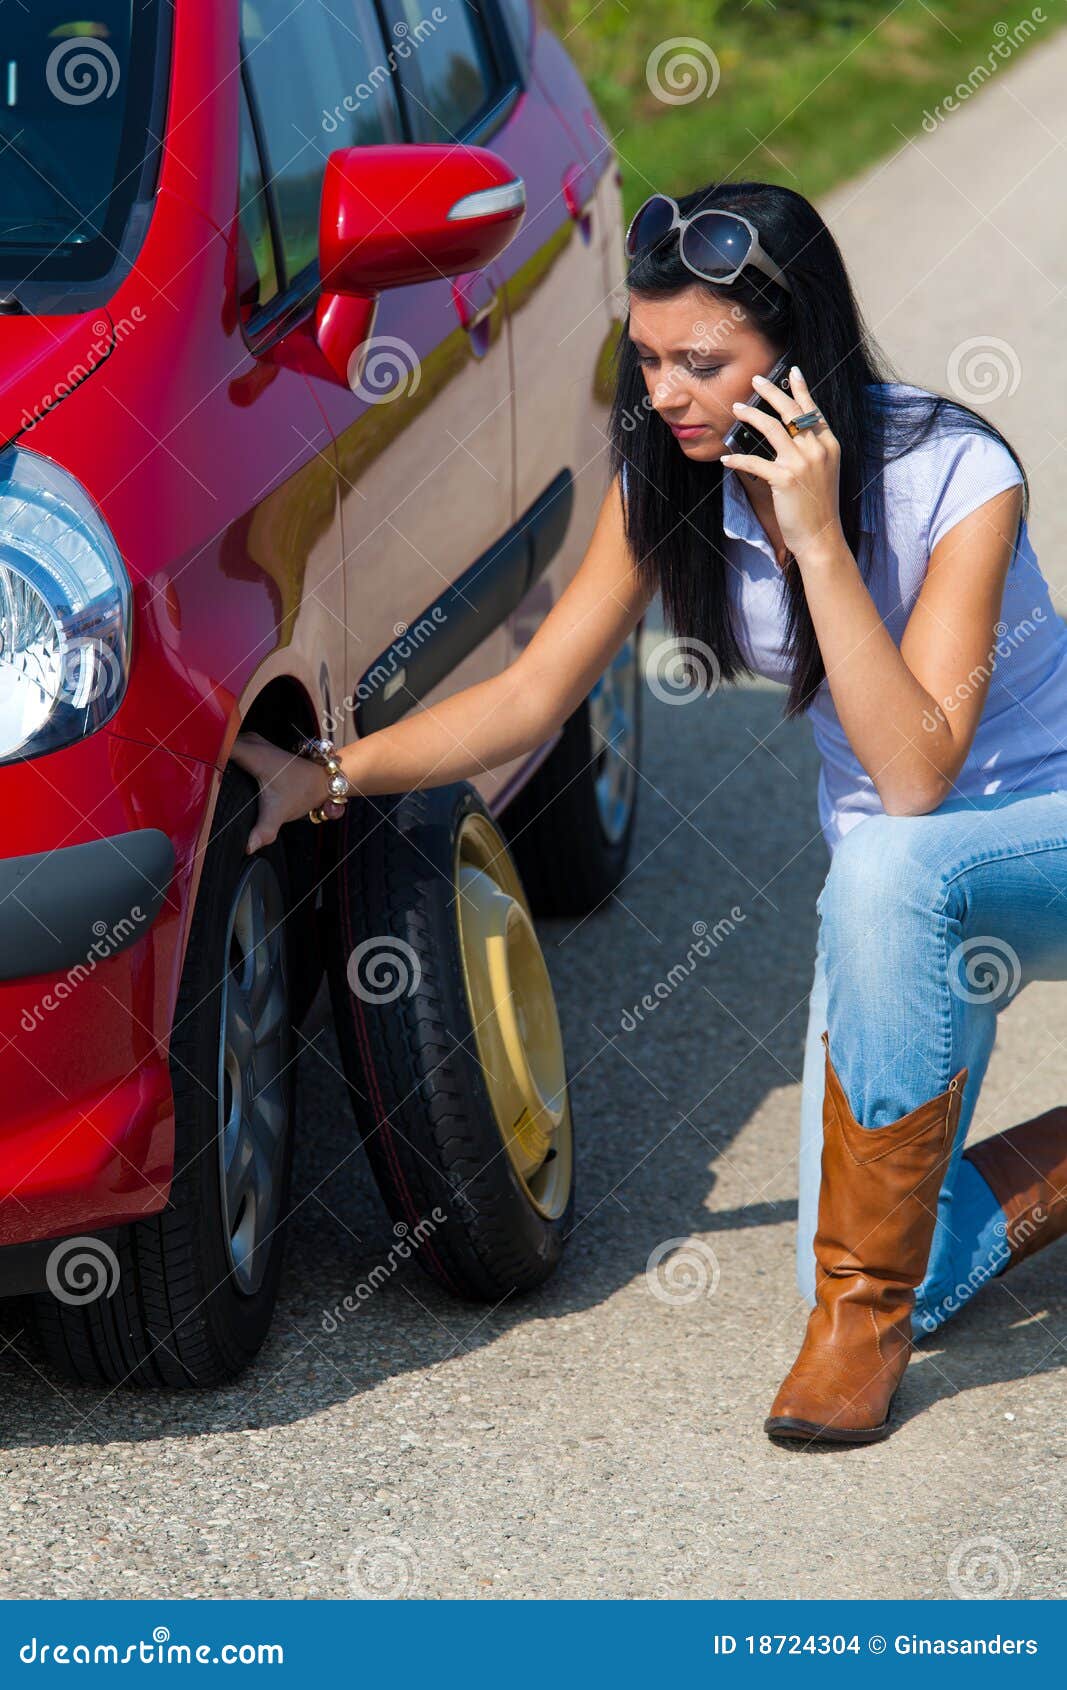 Woman With A Flat Tire In Car Stock Images - Image: 18724304